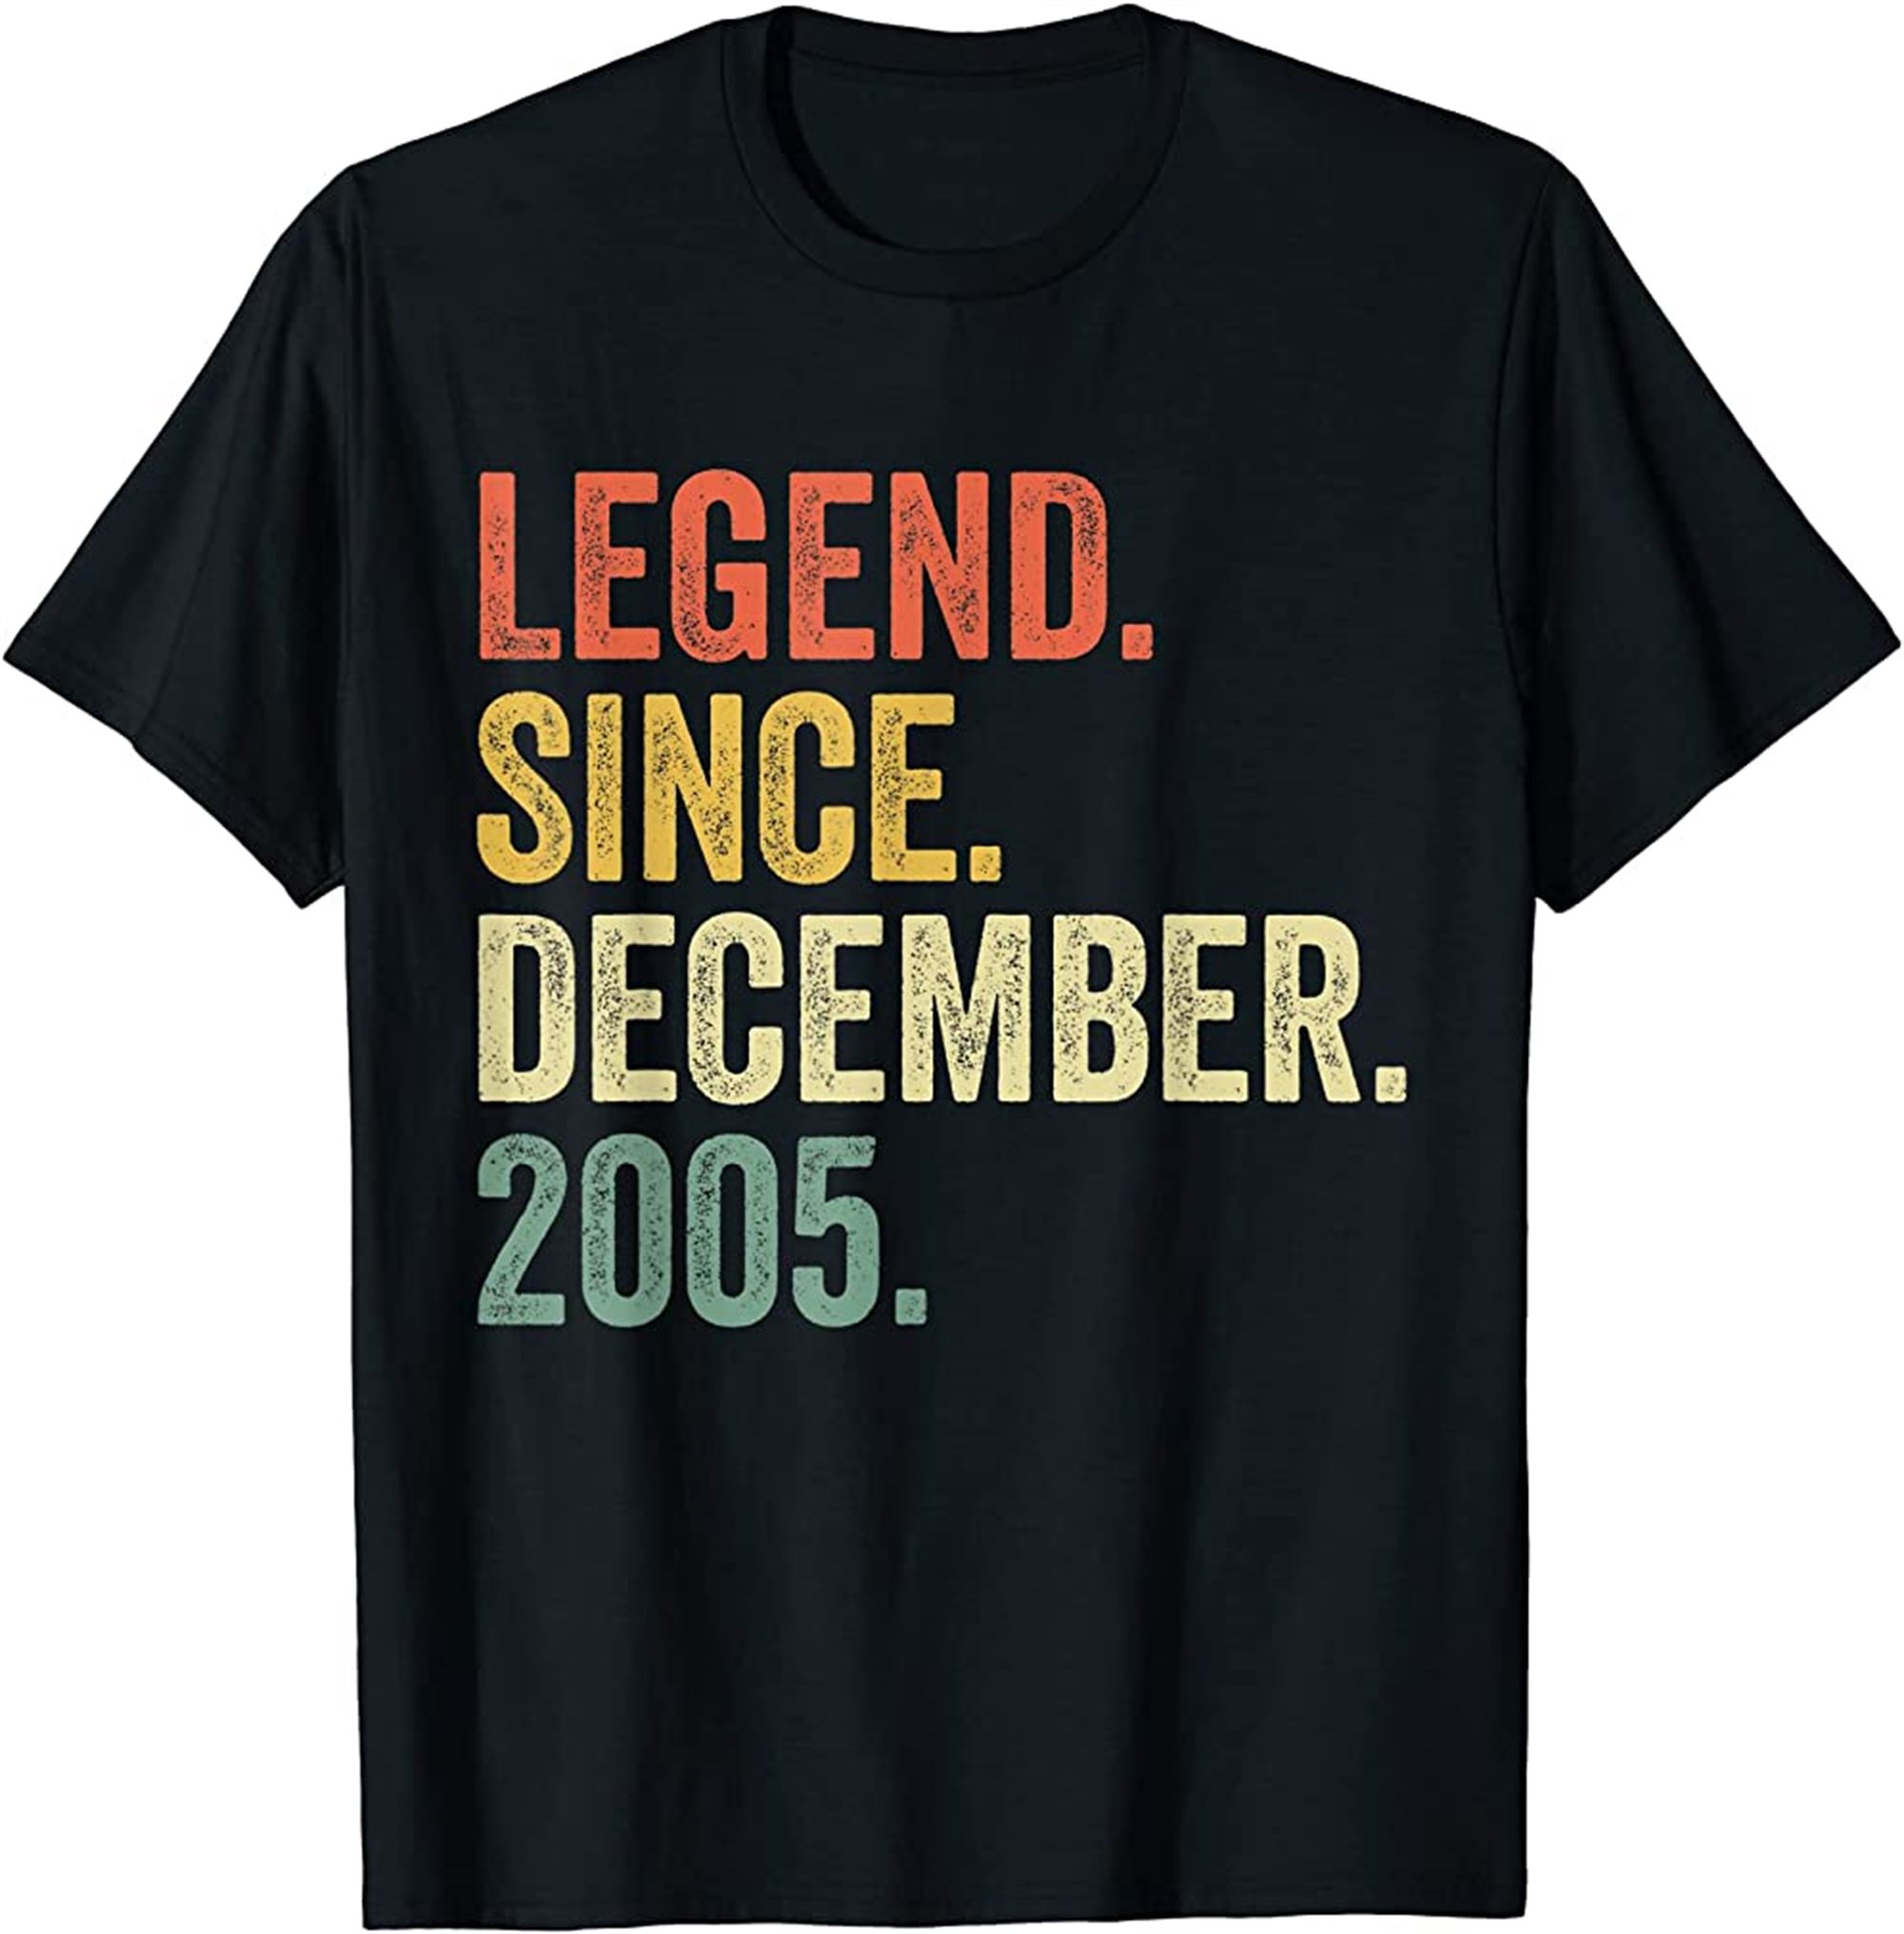 Vintage Legend Since December 2005 16th Birthday Retro T-shirt Full Size Up To 5xl